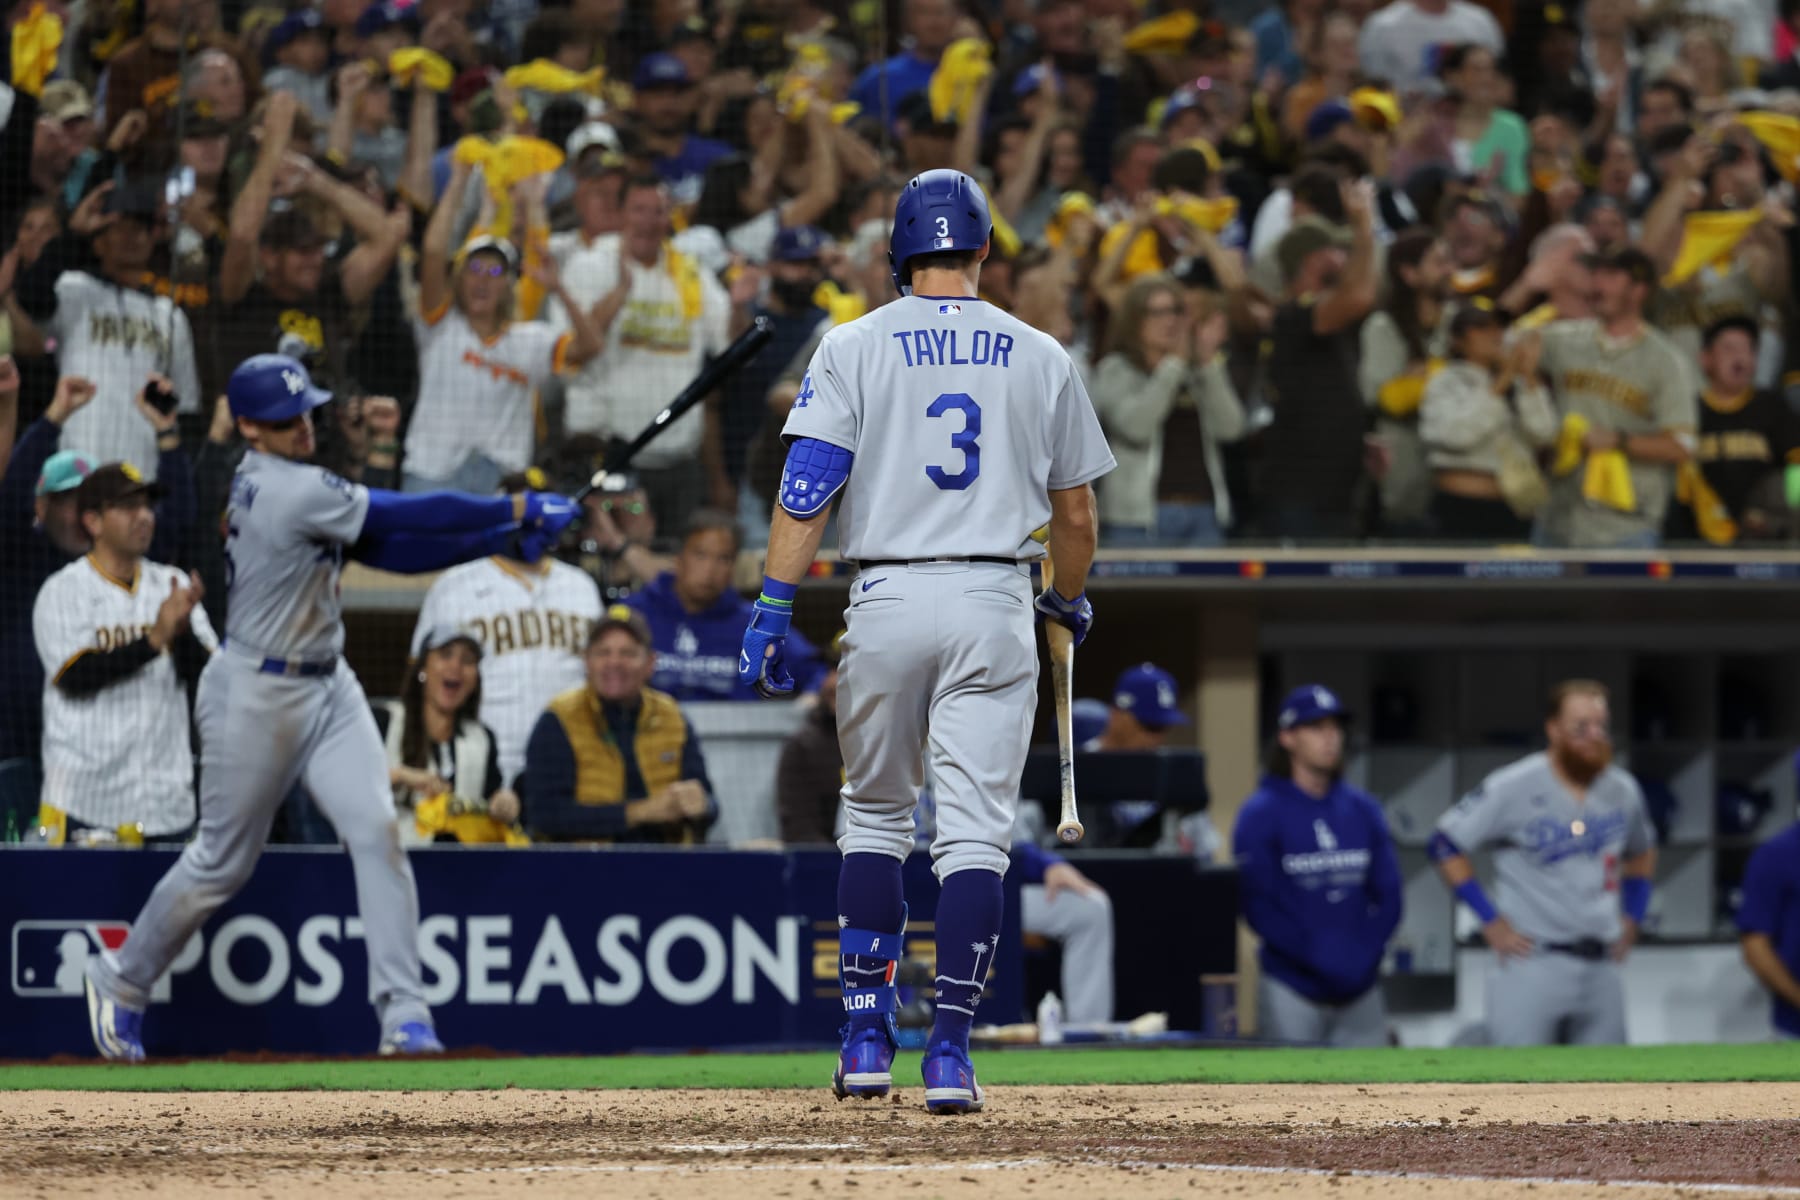 Padres beat Dodgers in Game 2 of NLDS